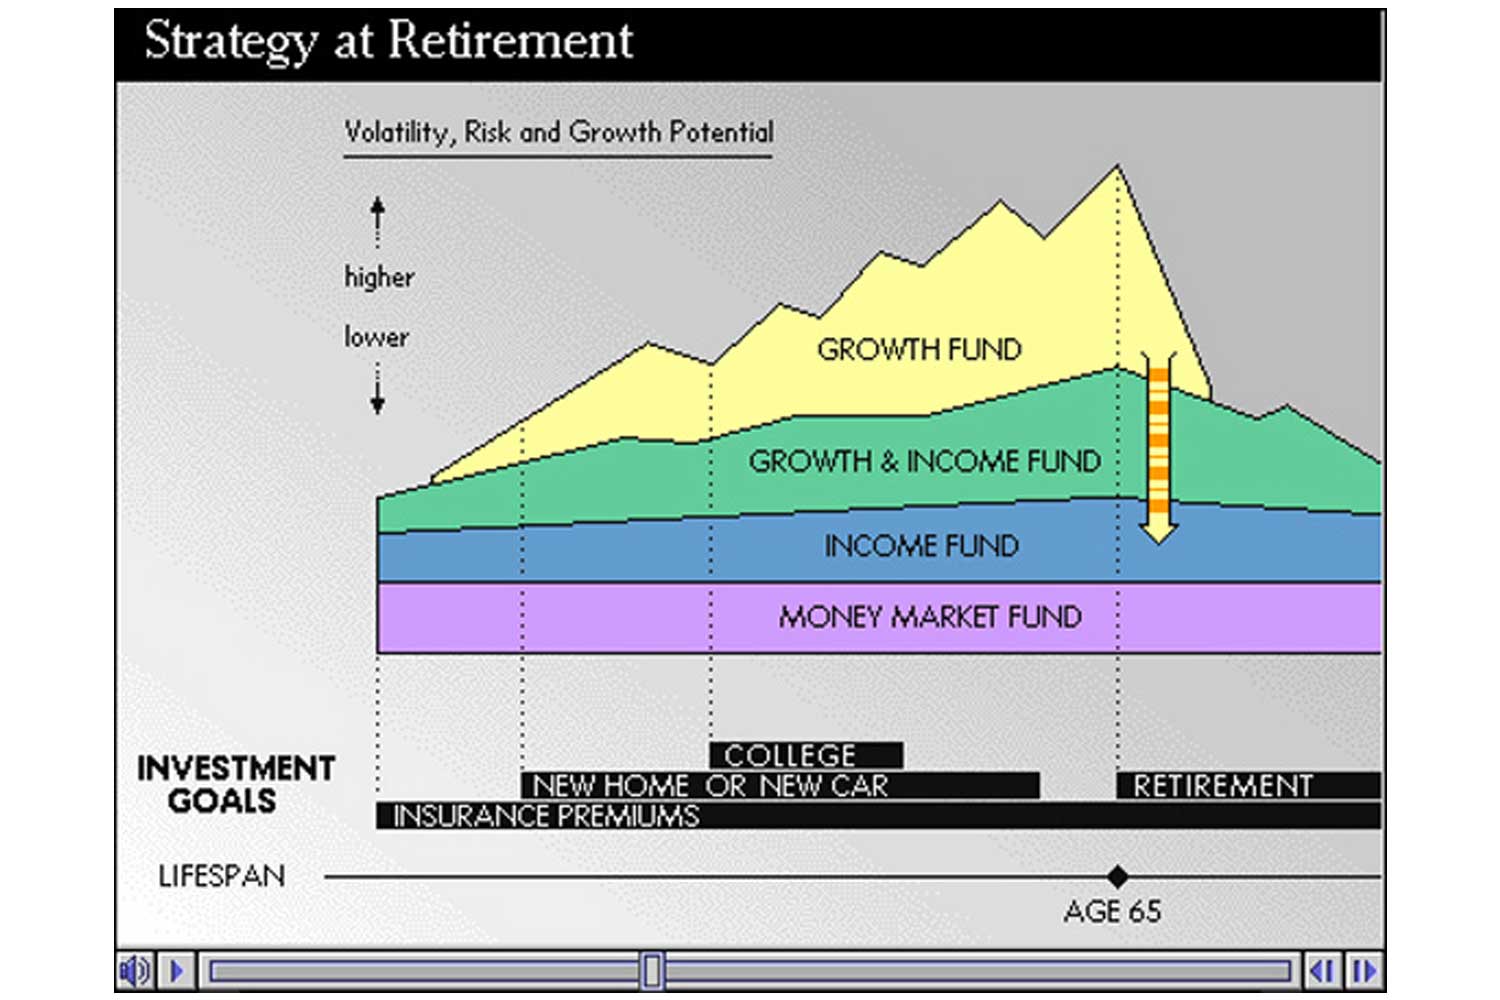  A generalized life-long investment strategy is visualized in this animation. It shows how a plan starts with secure funds, then progressively adds higher growth investments, which are the first to be withdrawn during retirement years. 